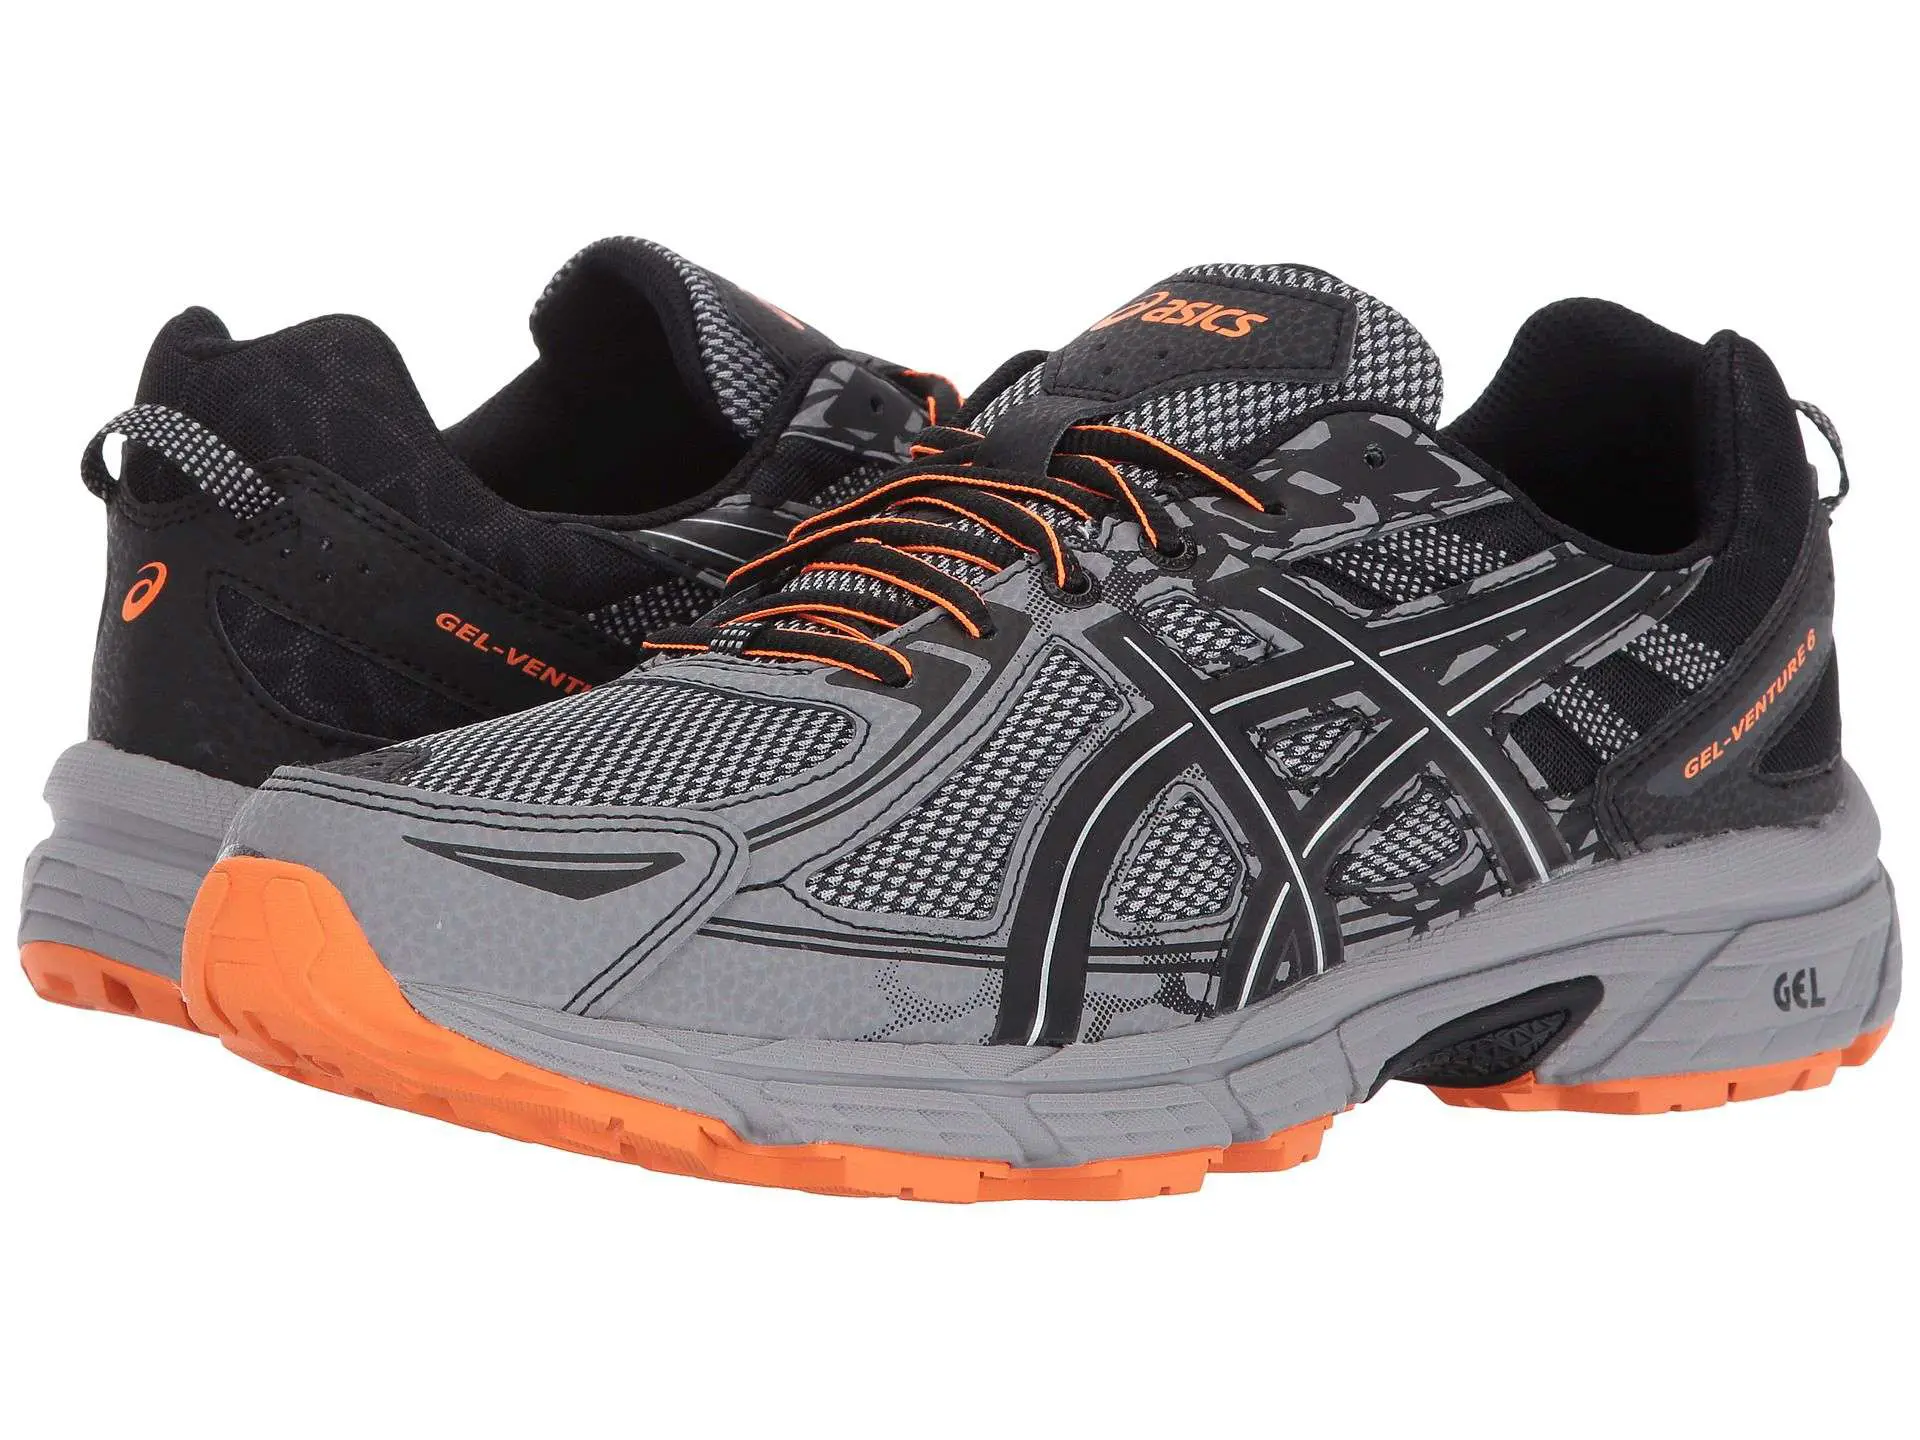 7 Best Mens Running Shoes for Plantar Fasciitis of 2018